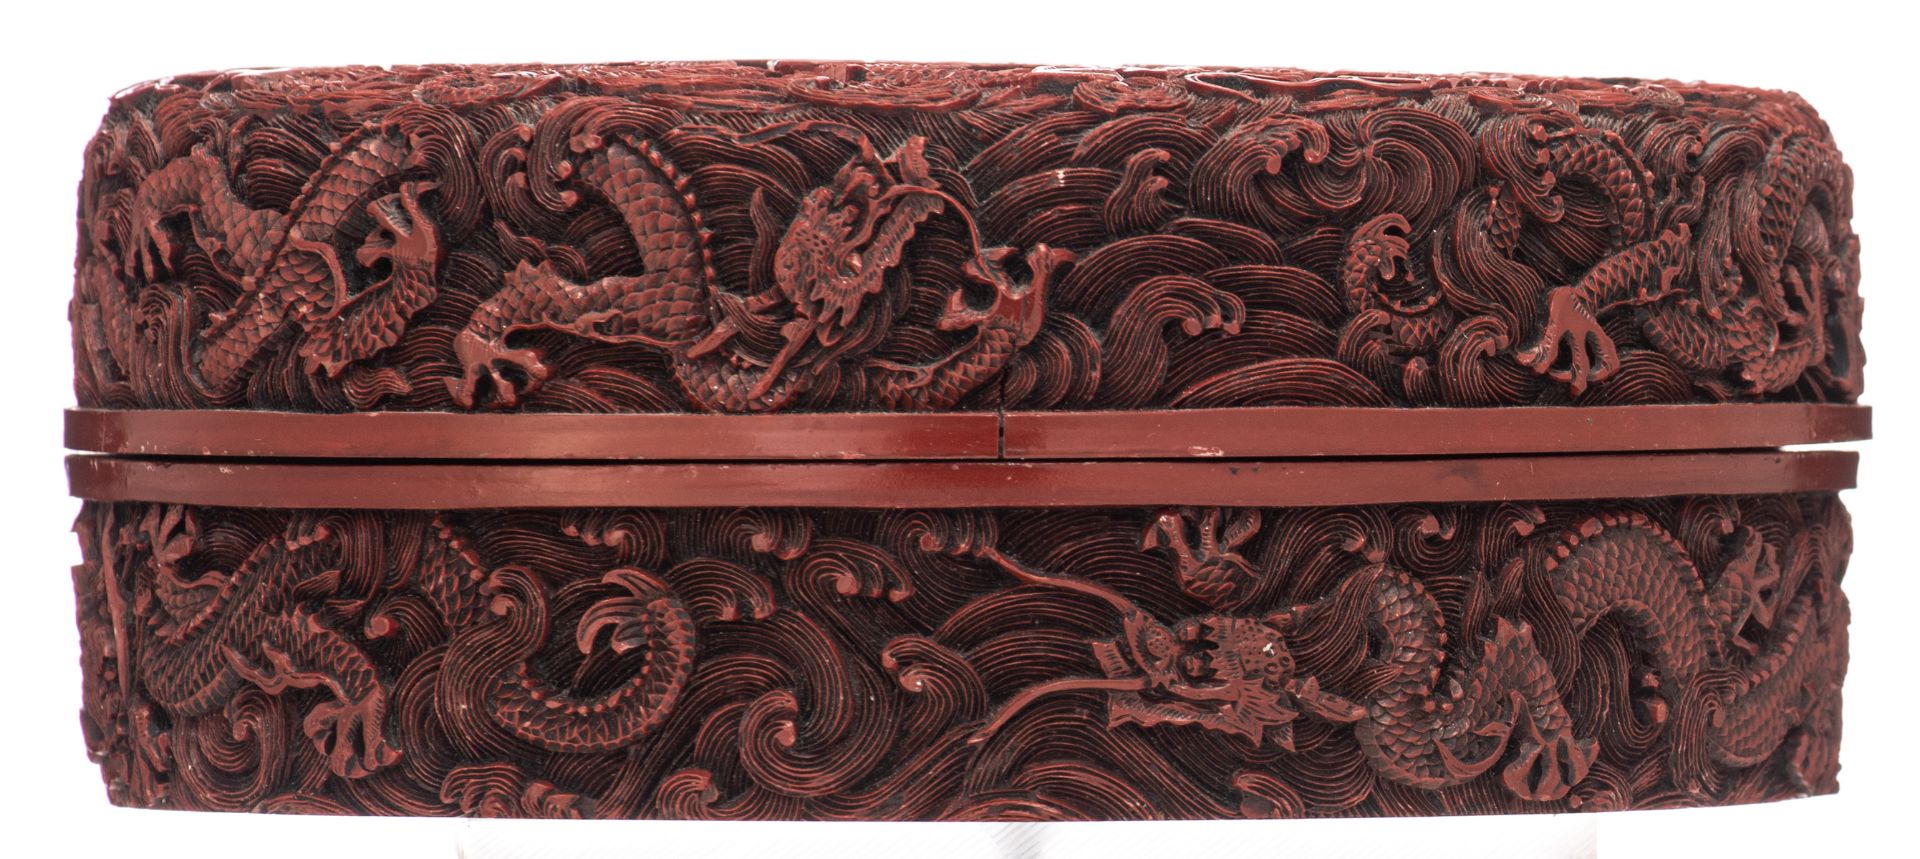 A Chinese style cinnabar red lacquer box and cover, carved with dragons in crashing waves, H 6,5 - ø - Bild 5 aus 8